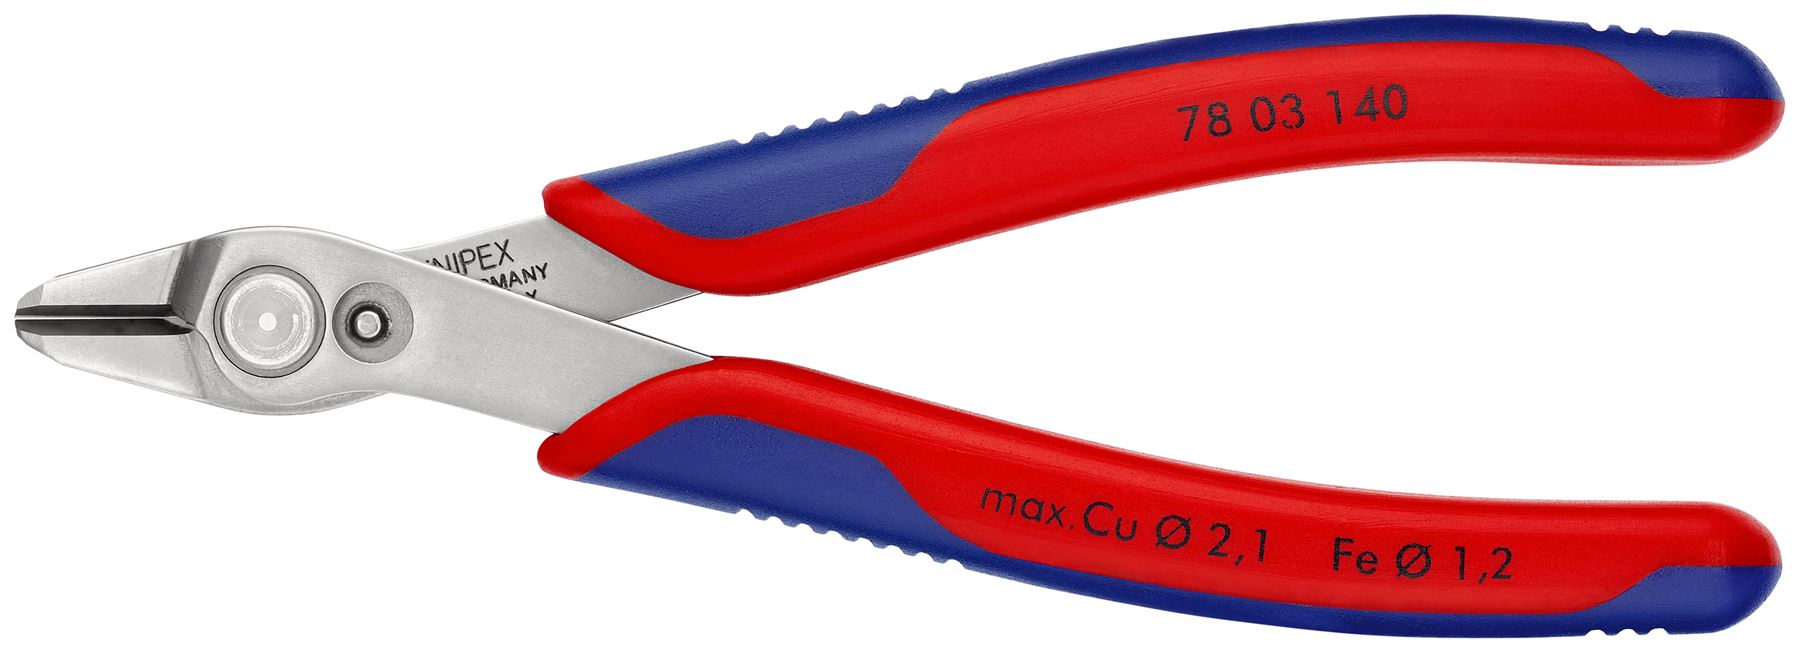 KNIPEX Electronics Super Knips XL Precision Cutting Pliers 140mm Multi Component Grips 78 03 140